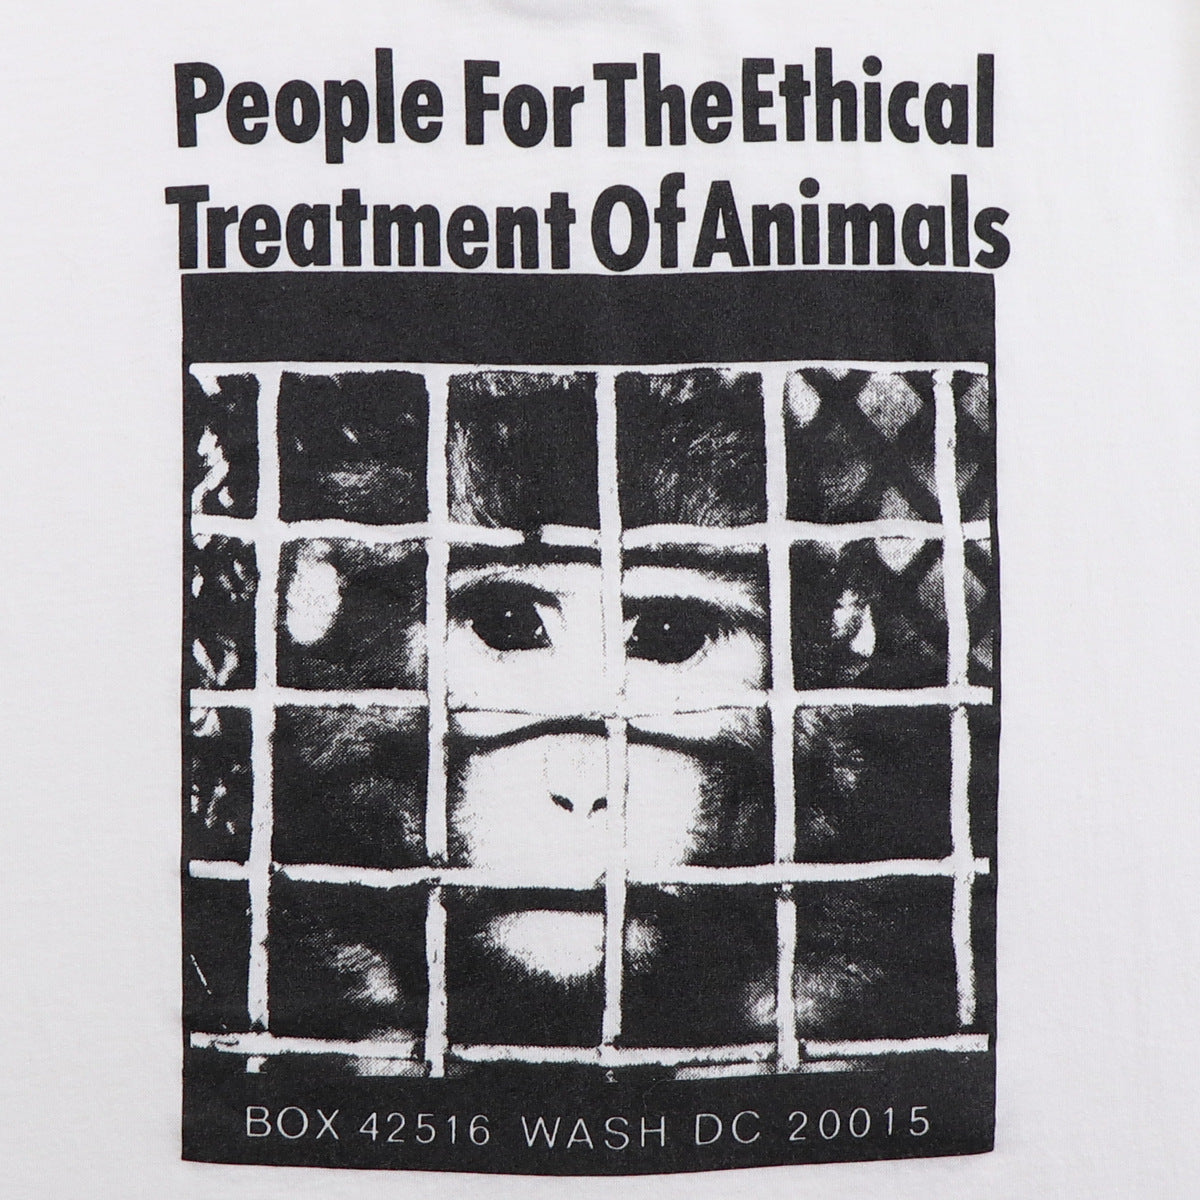 It - PETA (People for the Ethical Treatment of Animals)